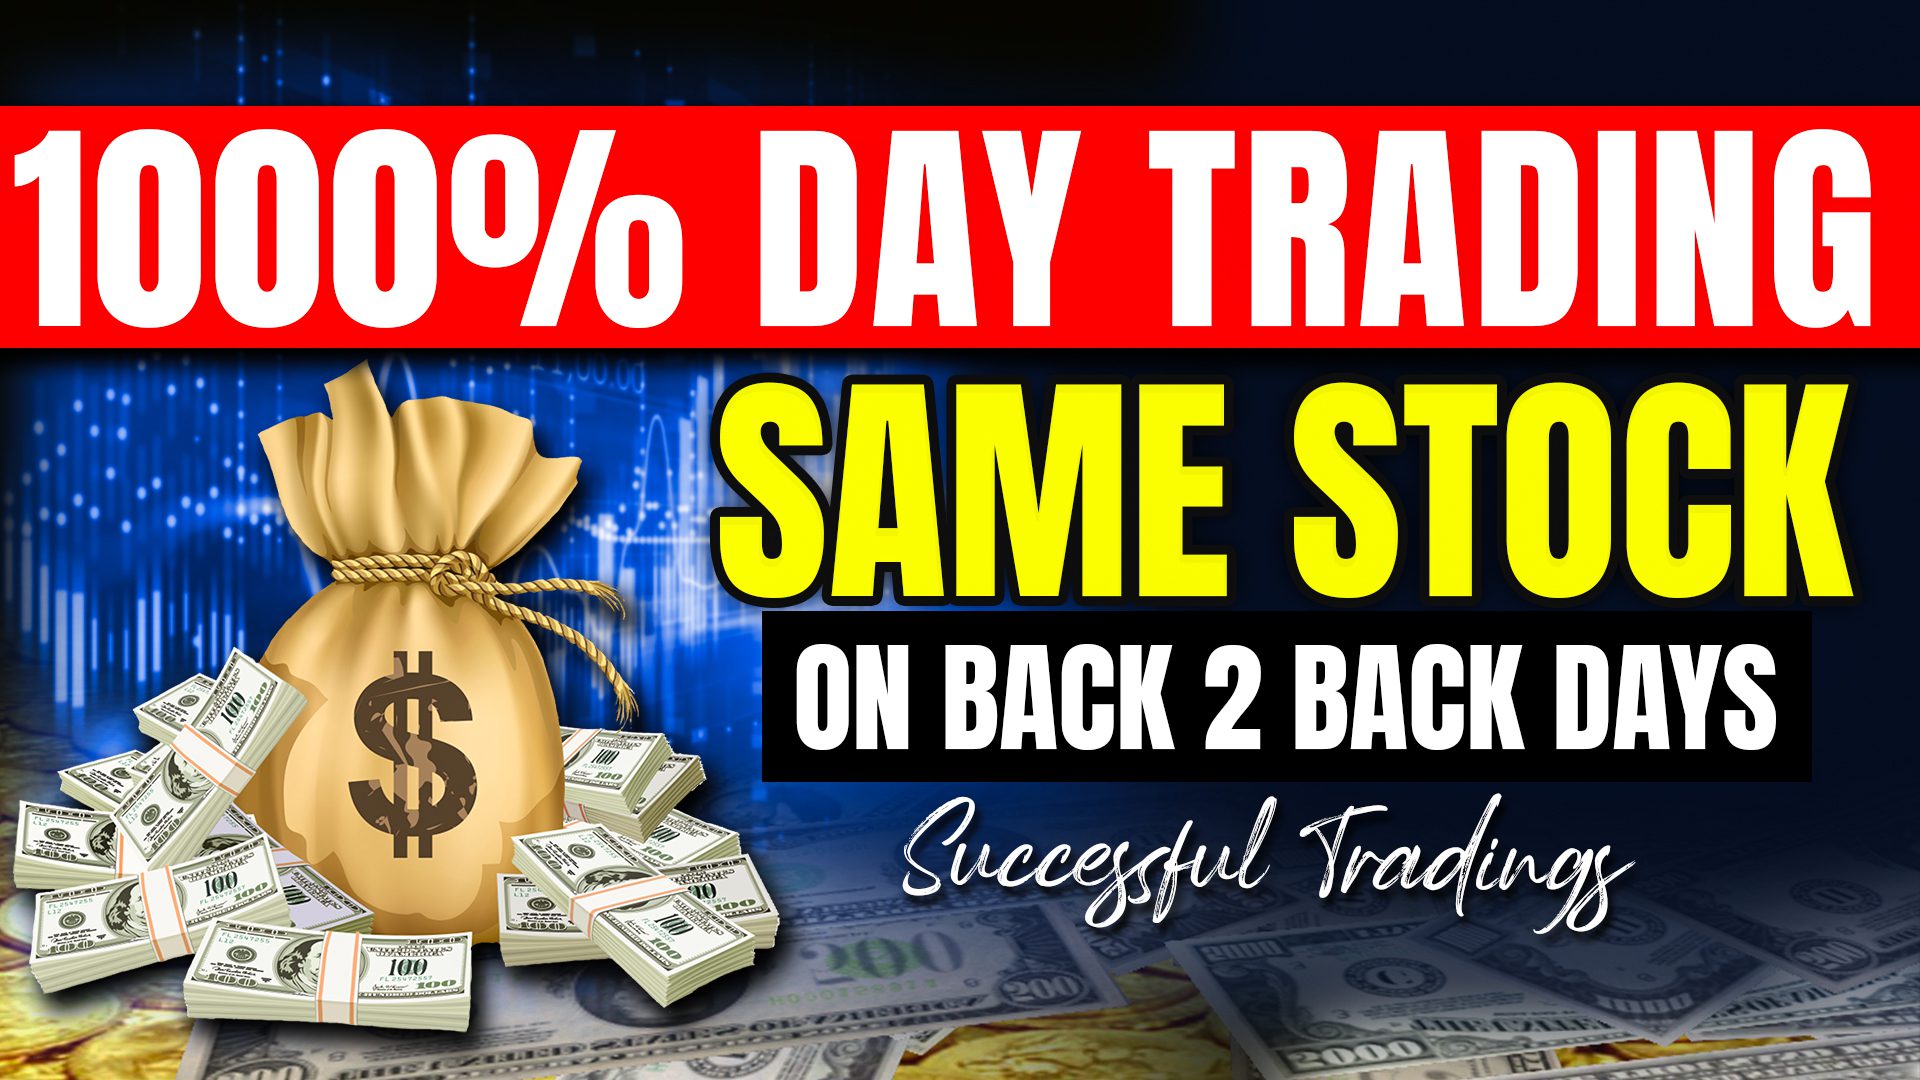 How ToDay Trde Options On E*TRADE- 1000% Day Trading on E*TRADE